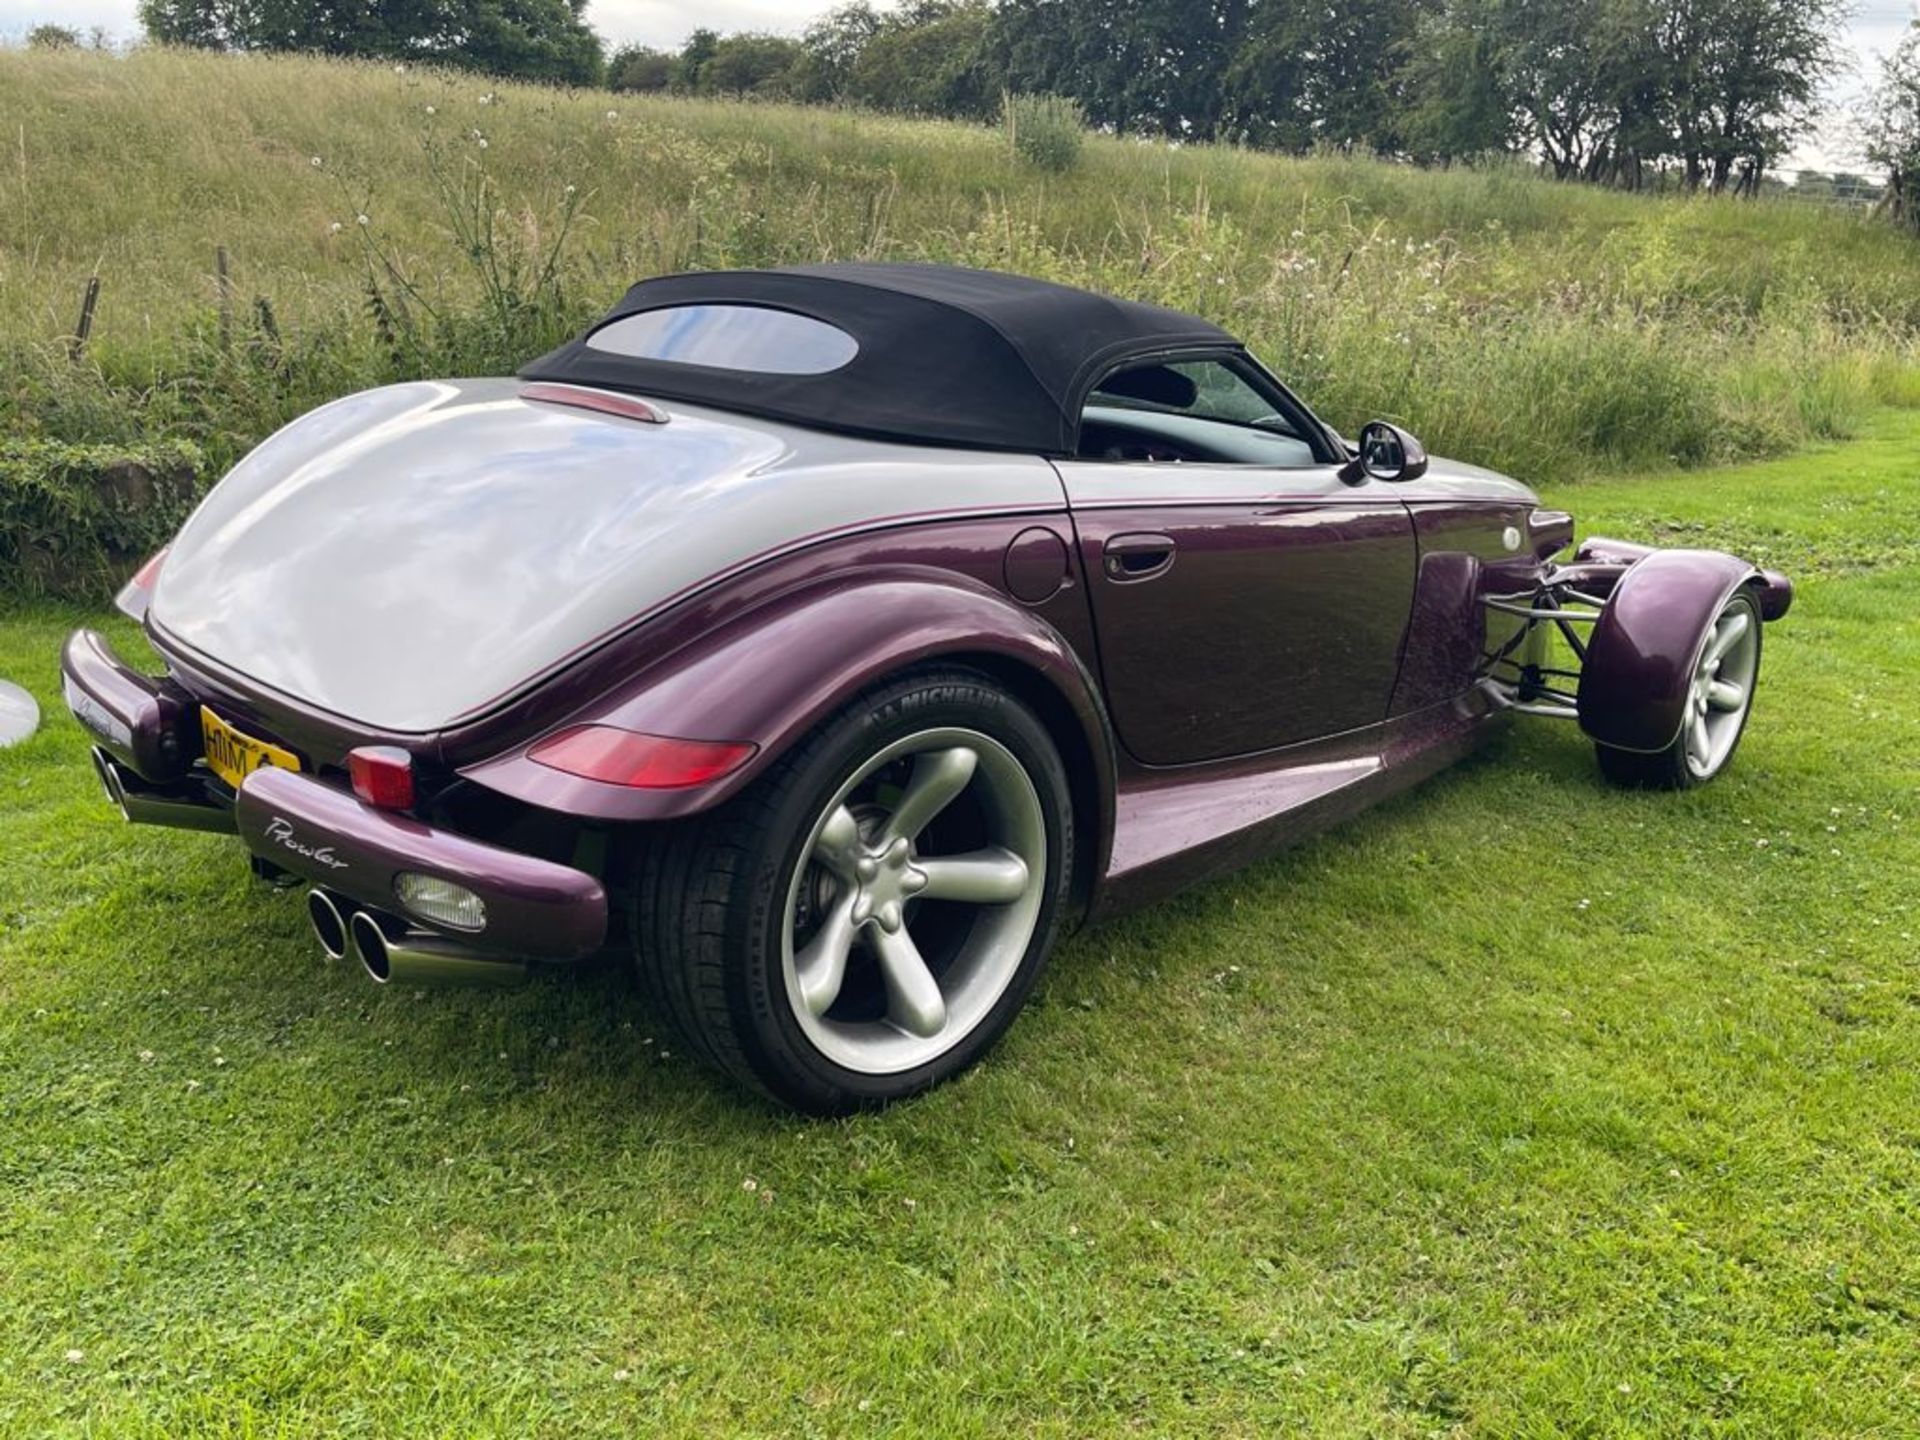 1998 CHRYSLER PLYMOUTH PROWLER V6 2 DOOR CONVERTIBLE, 3500cc PETROL ENGINE, AUTO *NO VAT* - Image 8 of 32